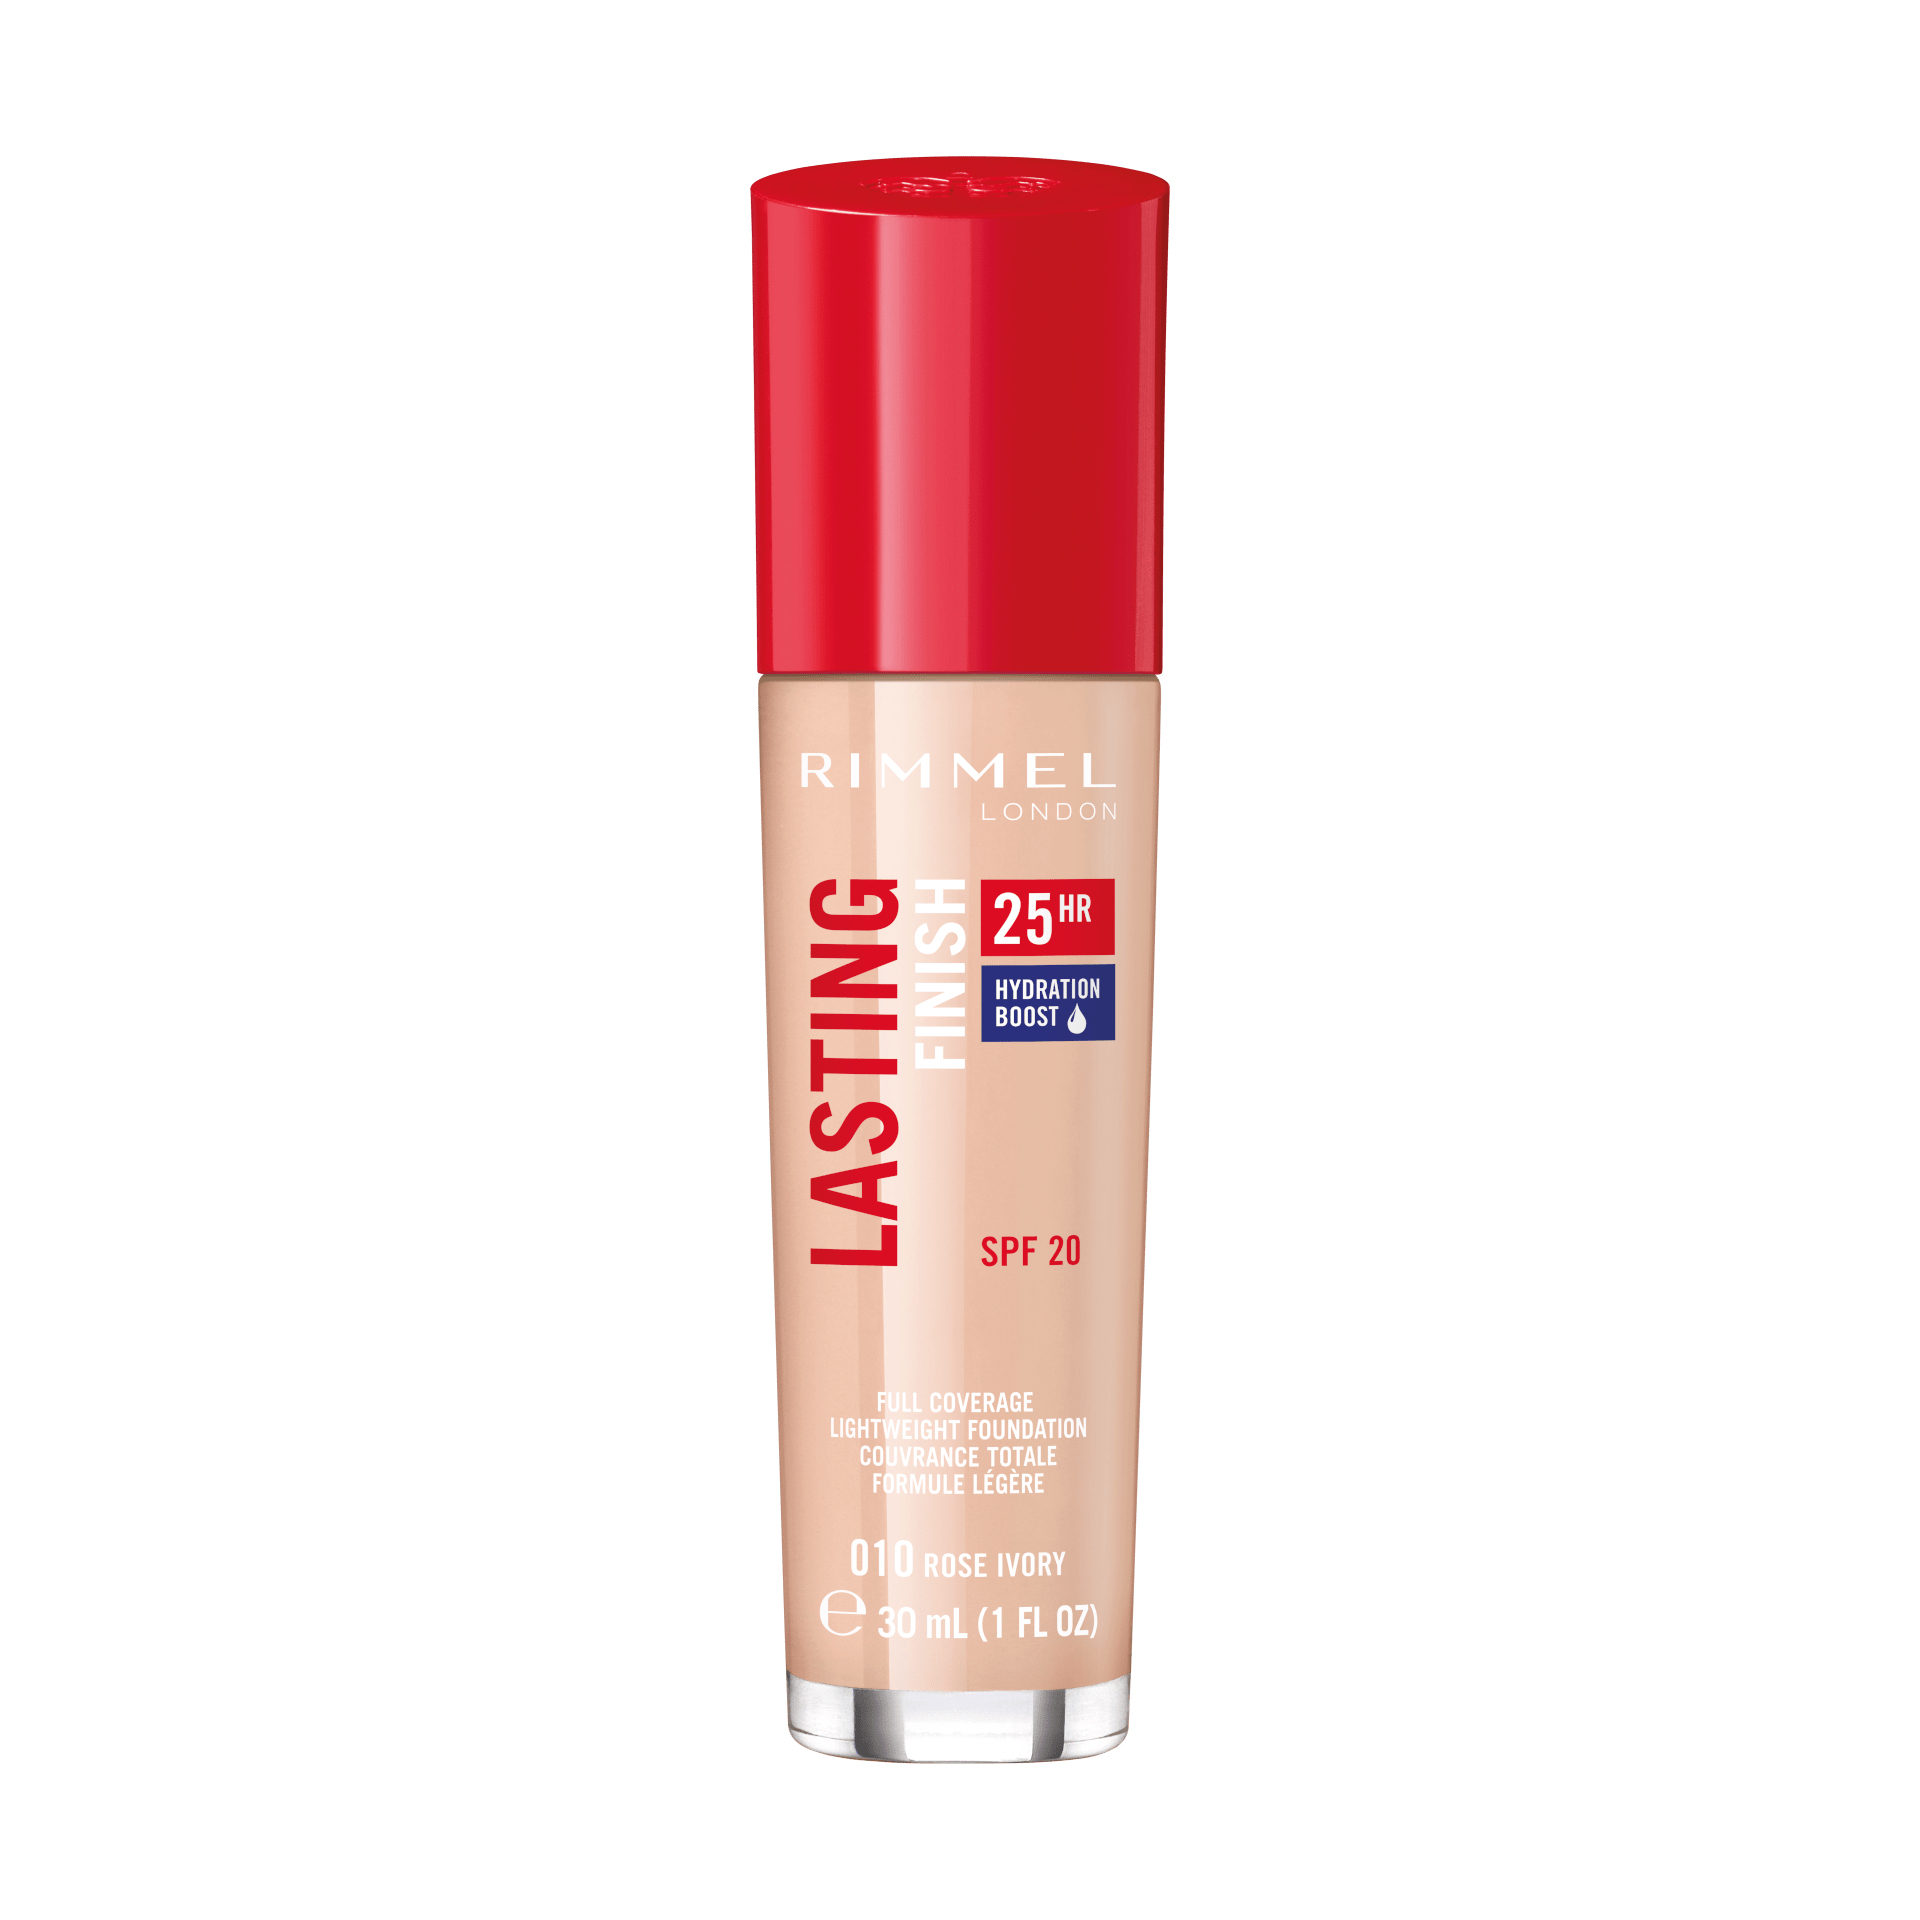 Rimmel Lasting Finish 25 hour foundation infused with Hyaluronic acid